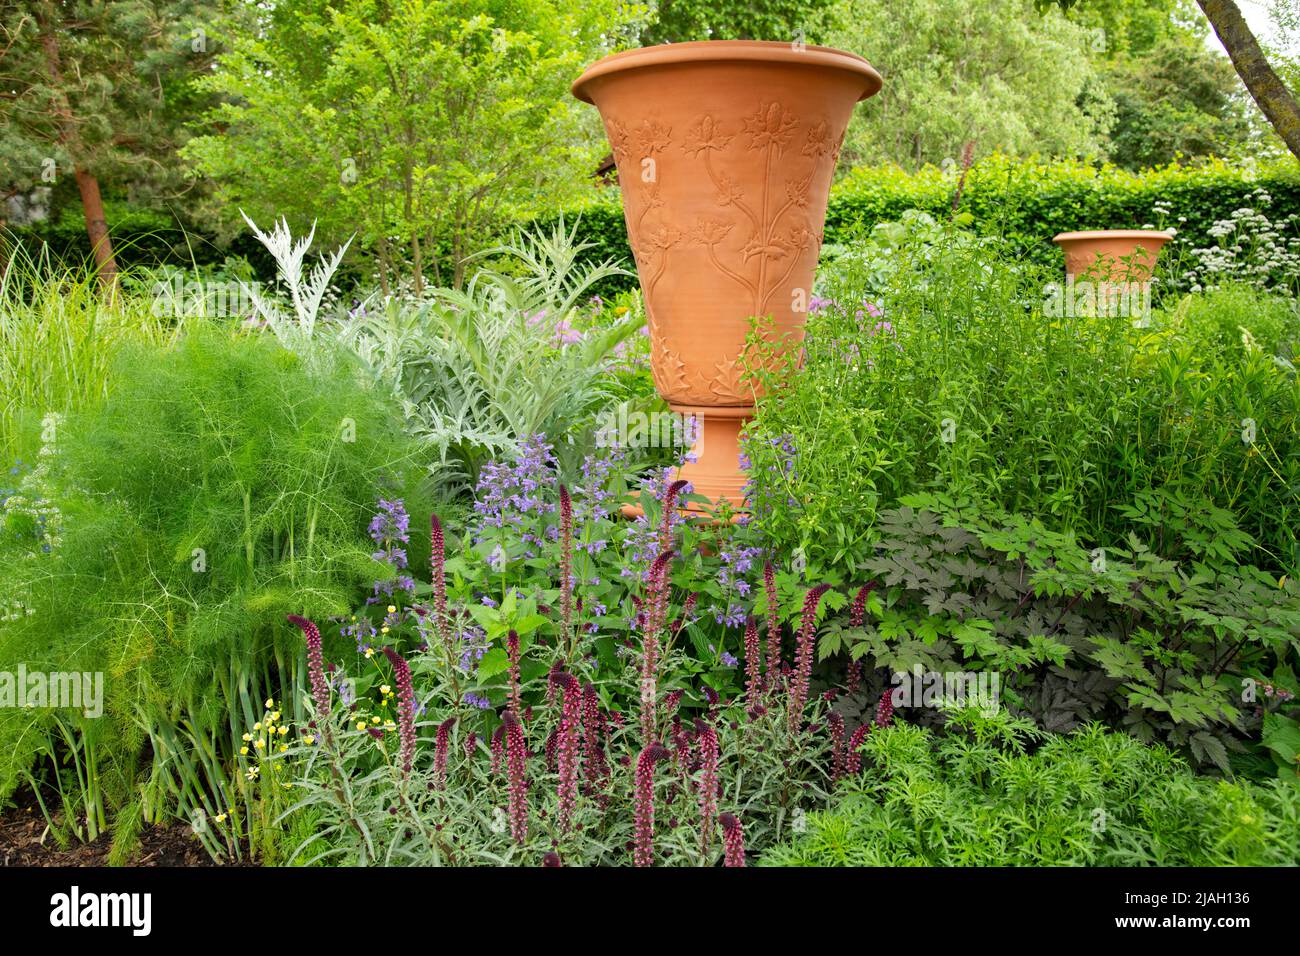 Echium rusicum, Cynara cardunculus, Foeniculum vulgare and Nepeta ‘Purrsian Blue’ around a large urn decorated with a thistle pattern designed by Whic Stock Photo